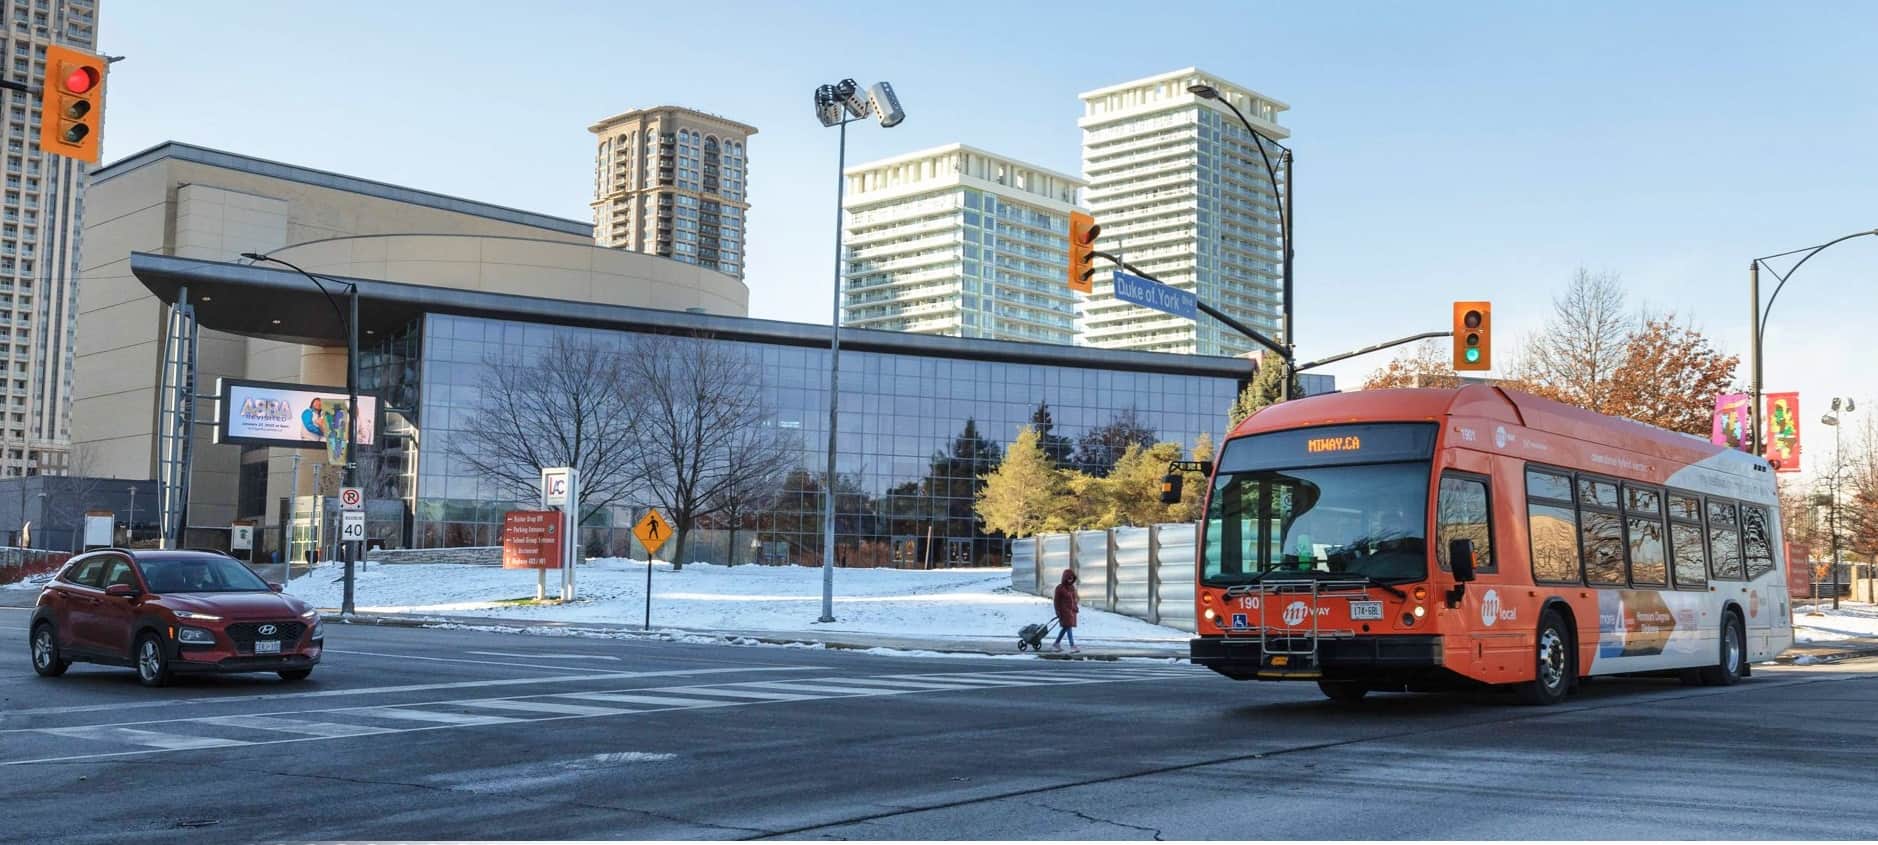 MiWay adds new services to bus routes in Mississauga